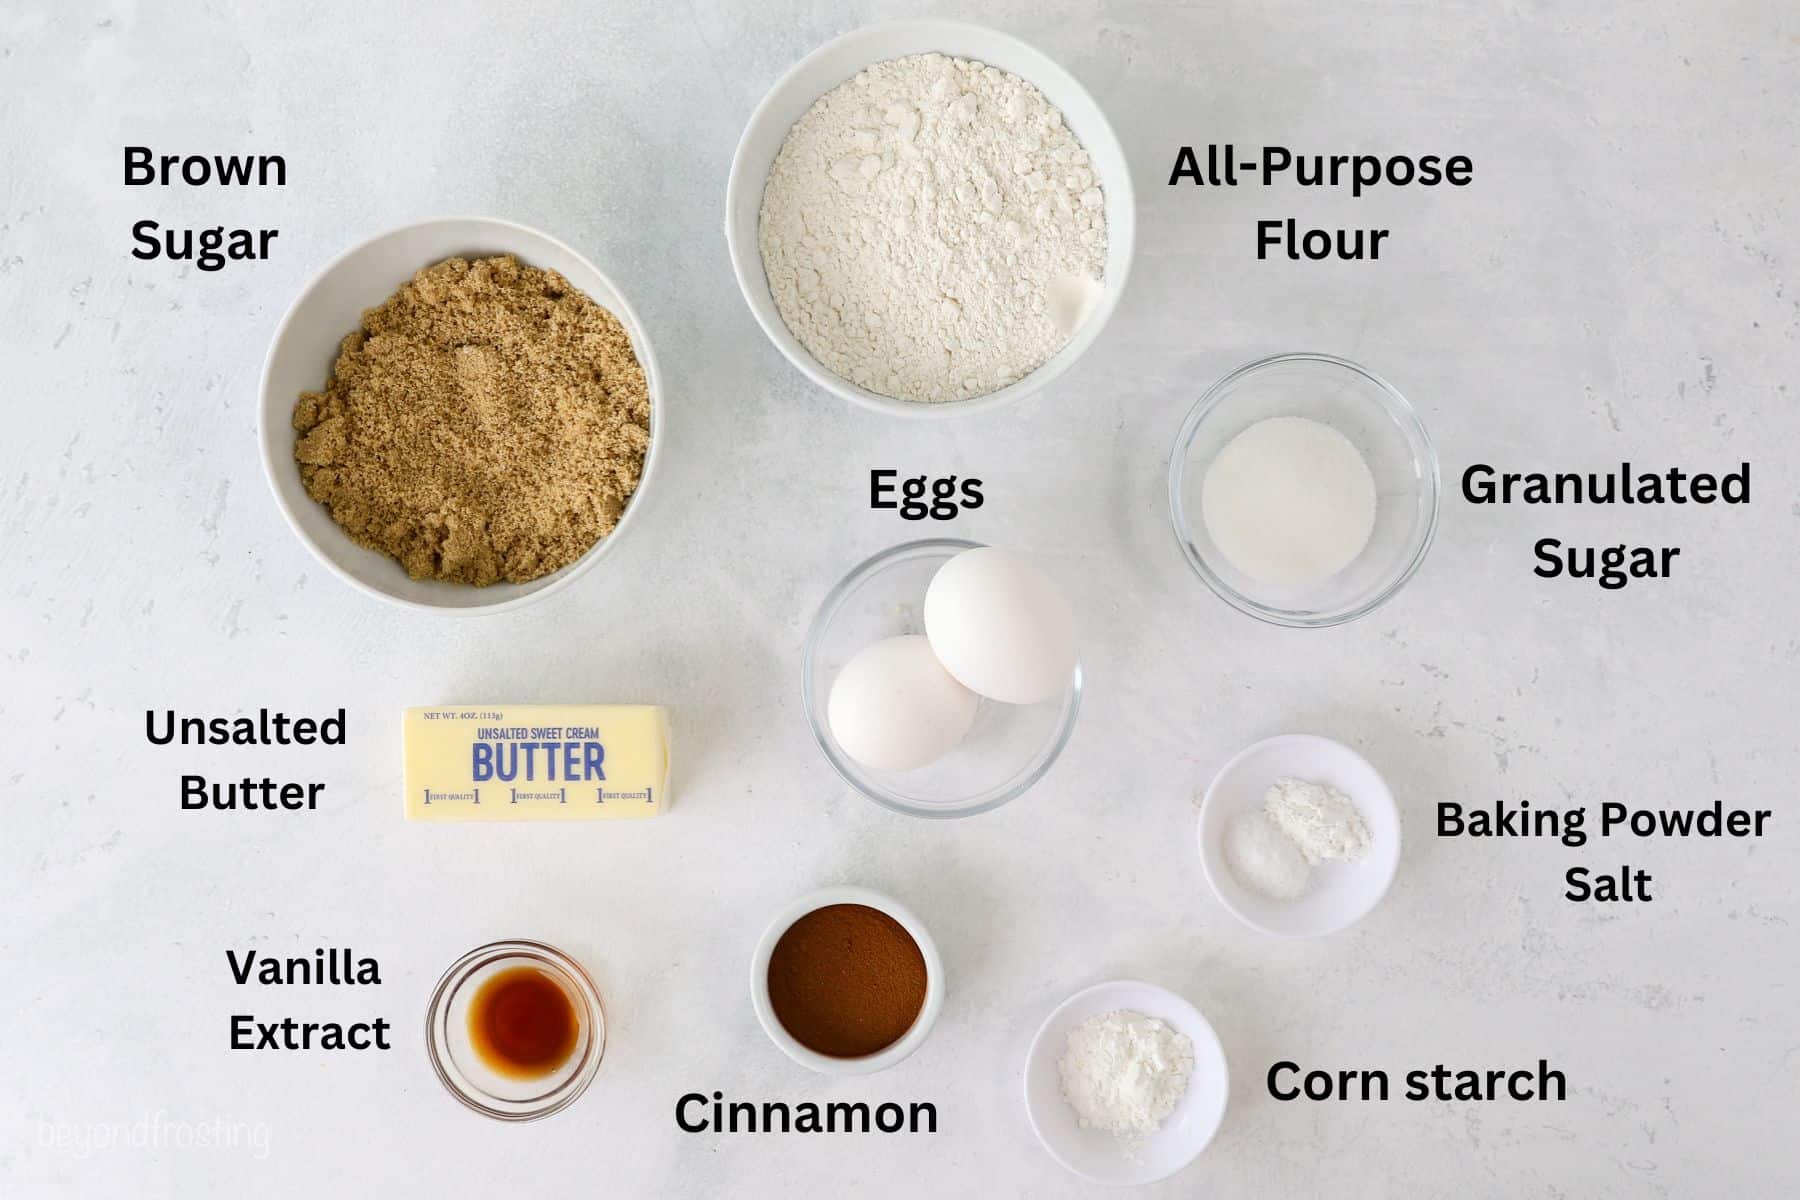 Ingredients for cinnamon roll blondies with text labels over each ingredient.